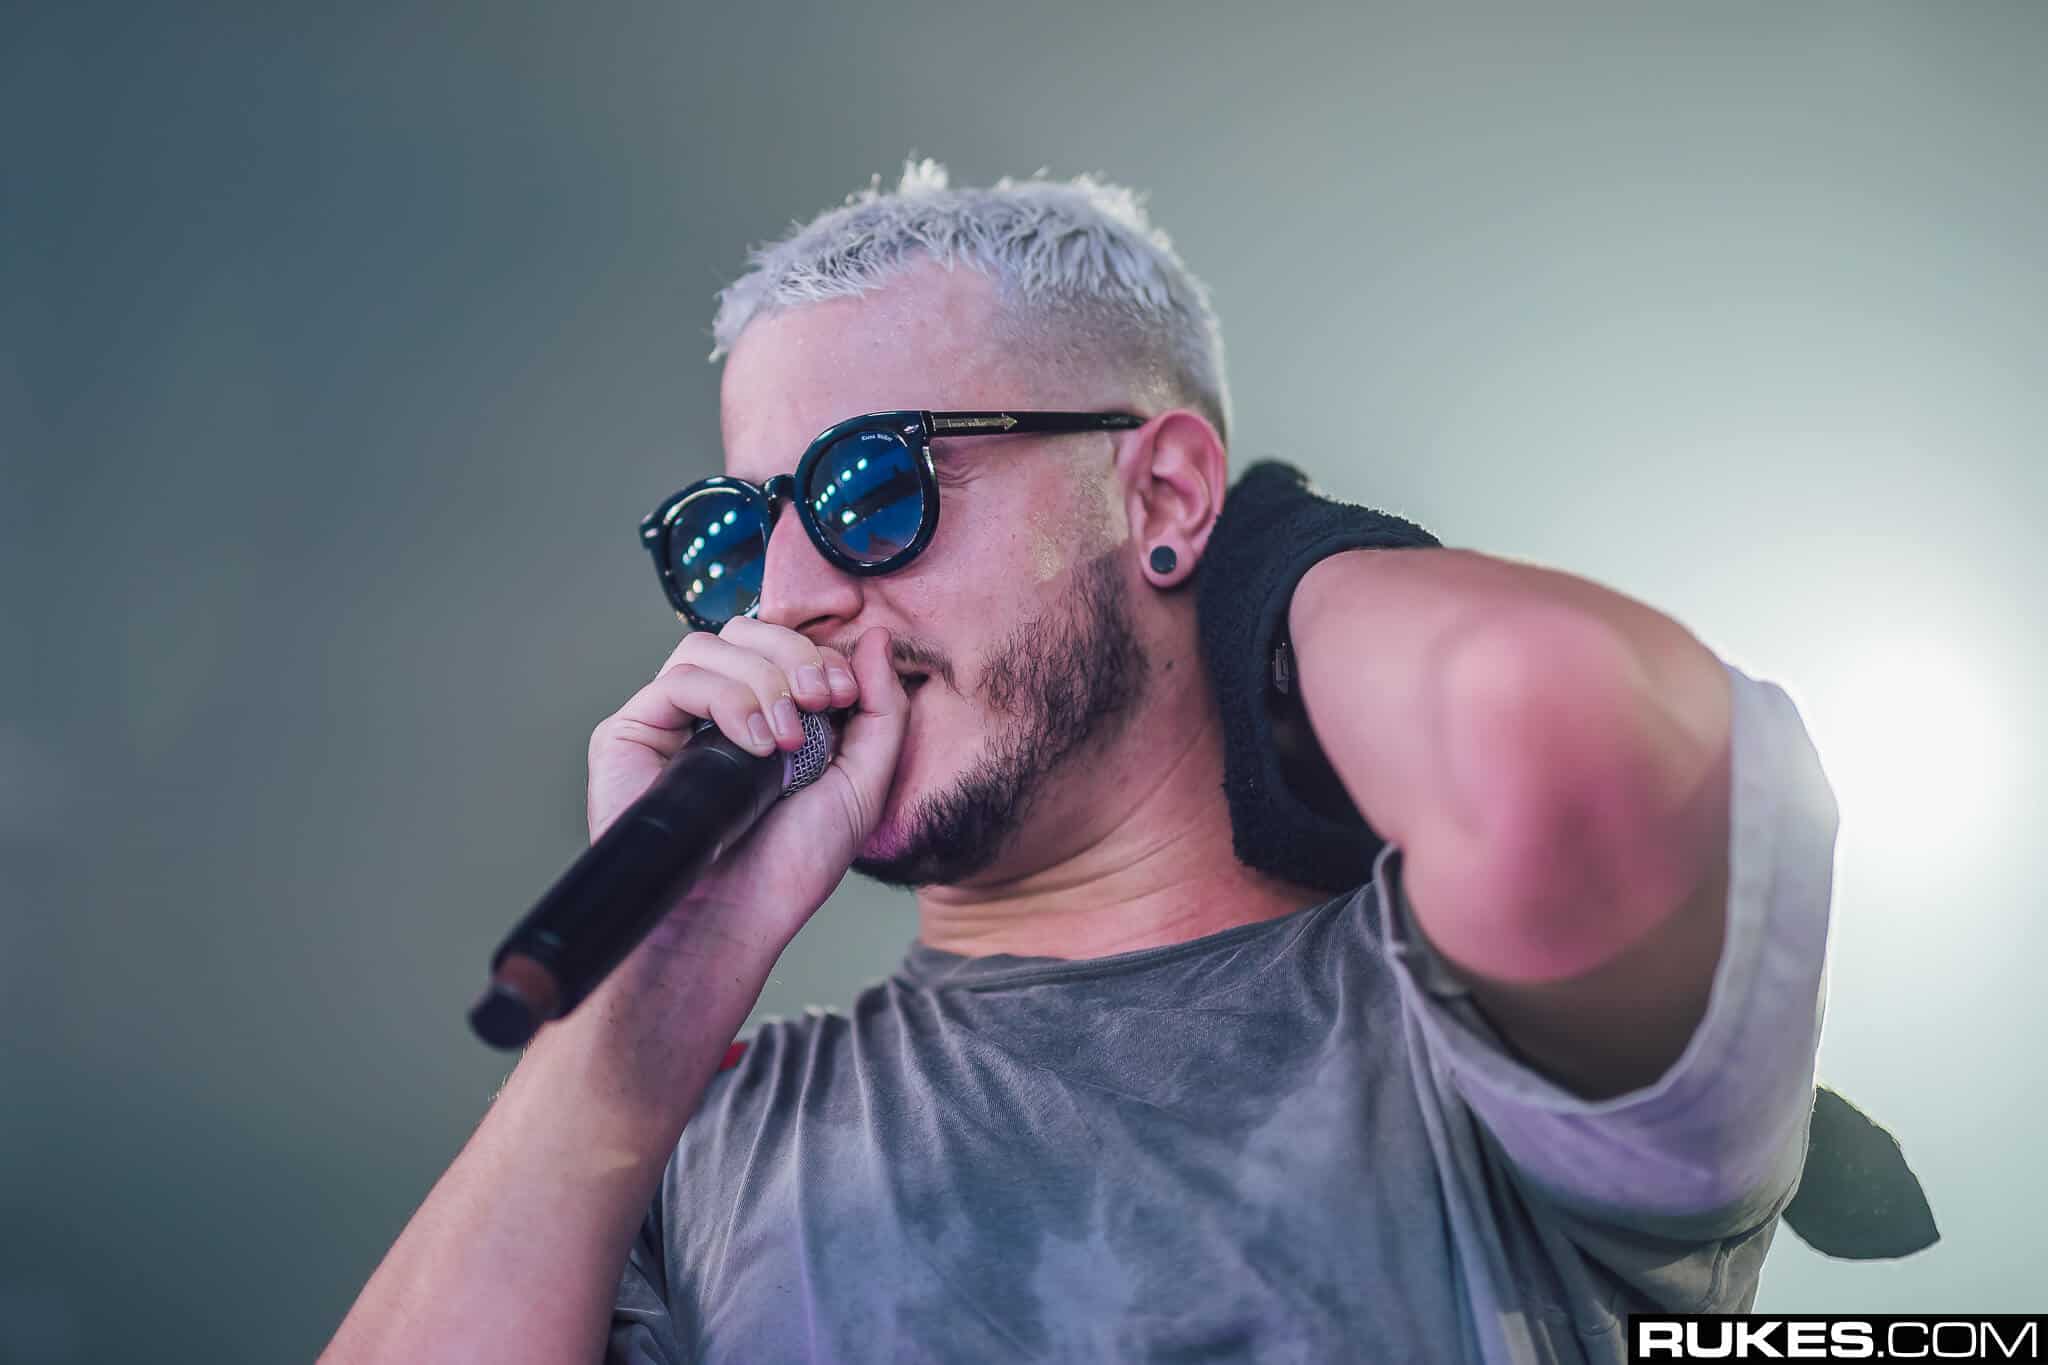 McDonald’s France partners with DJ Snake for his own meal